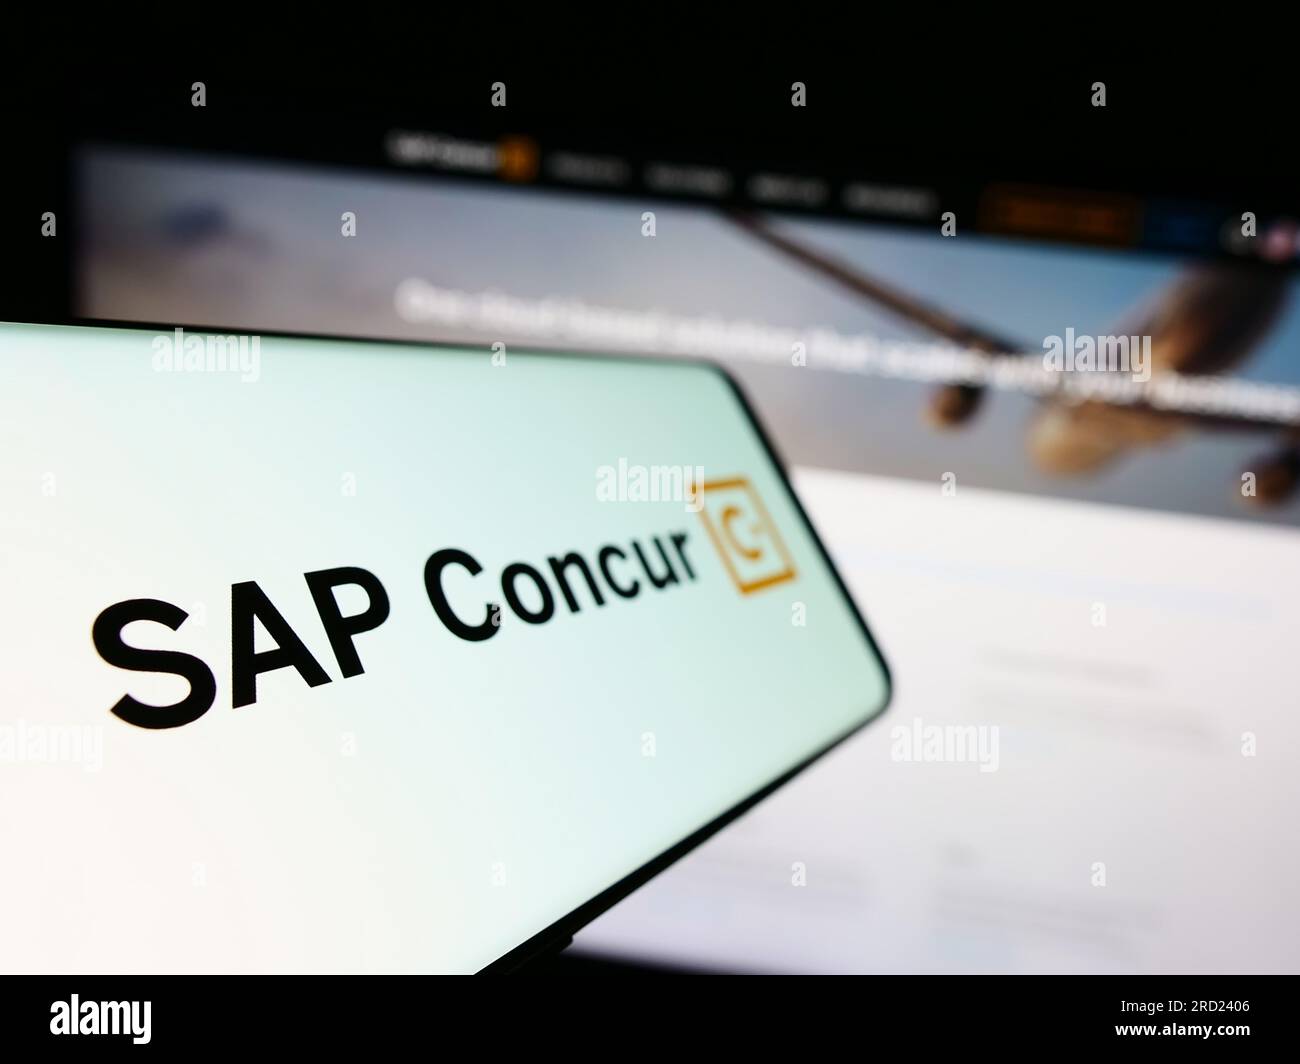 Mobile phone with logo of expense management software SAP Concur on screen in front of business website. Focus on left of phone display. Stock Photo